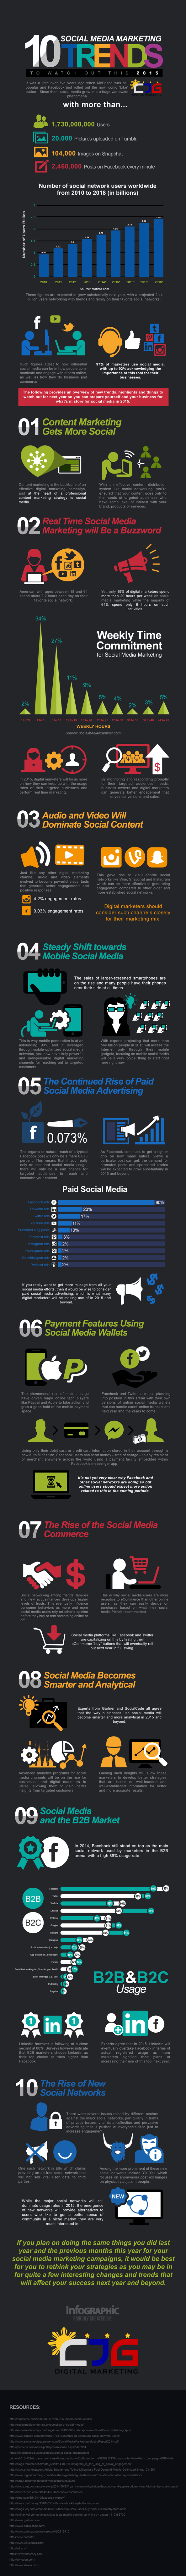 10 Social Media Marketing Trends to Watch Out this 2015 (Infographic) - An Infographic from CJG Digital Marketing